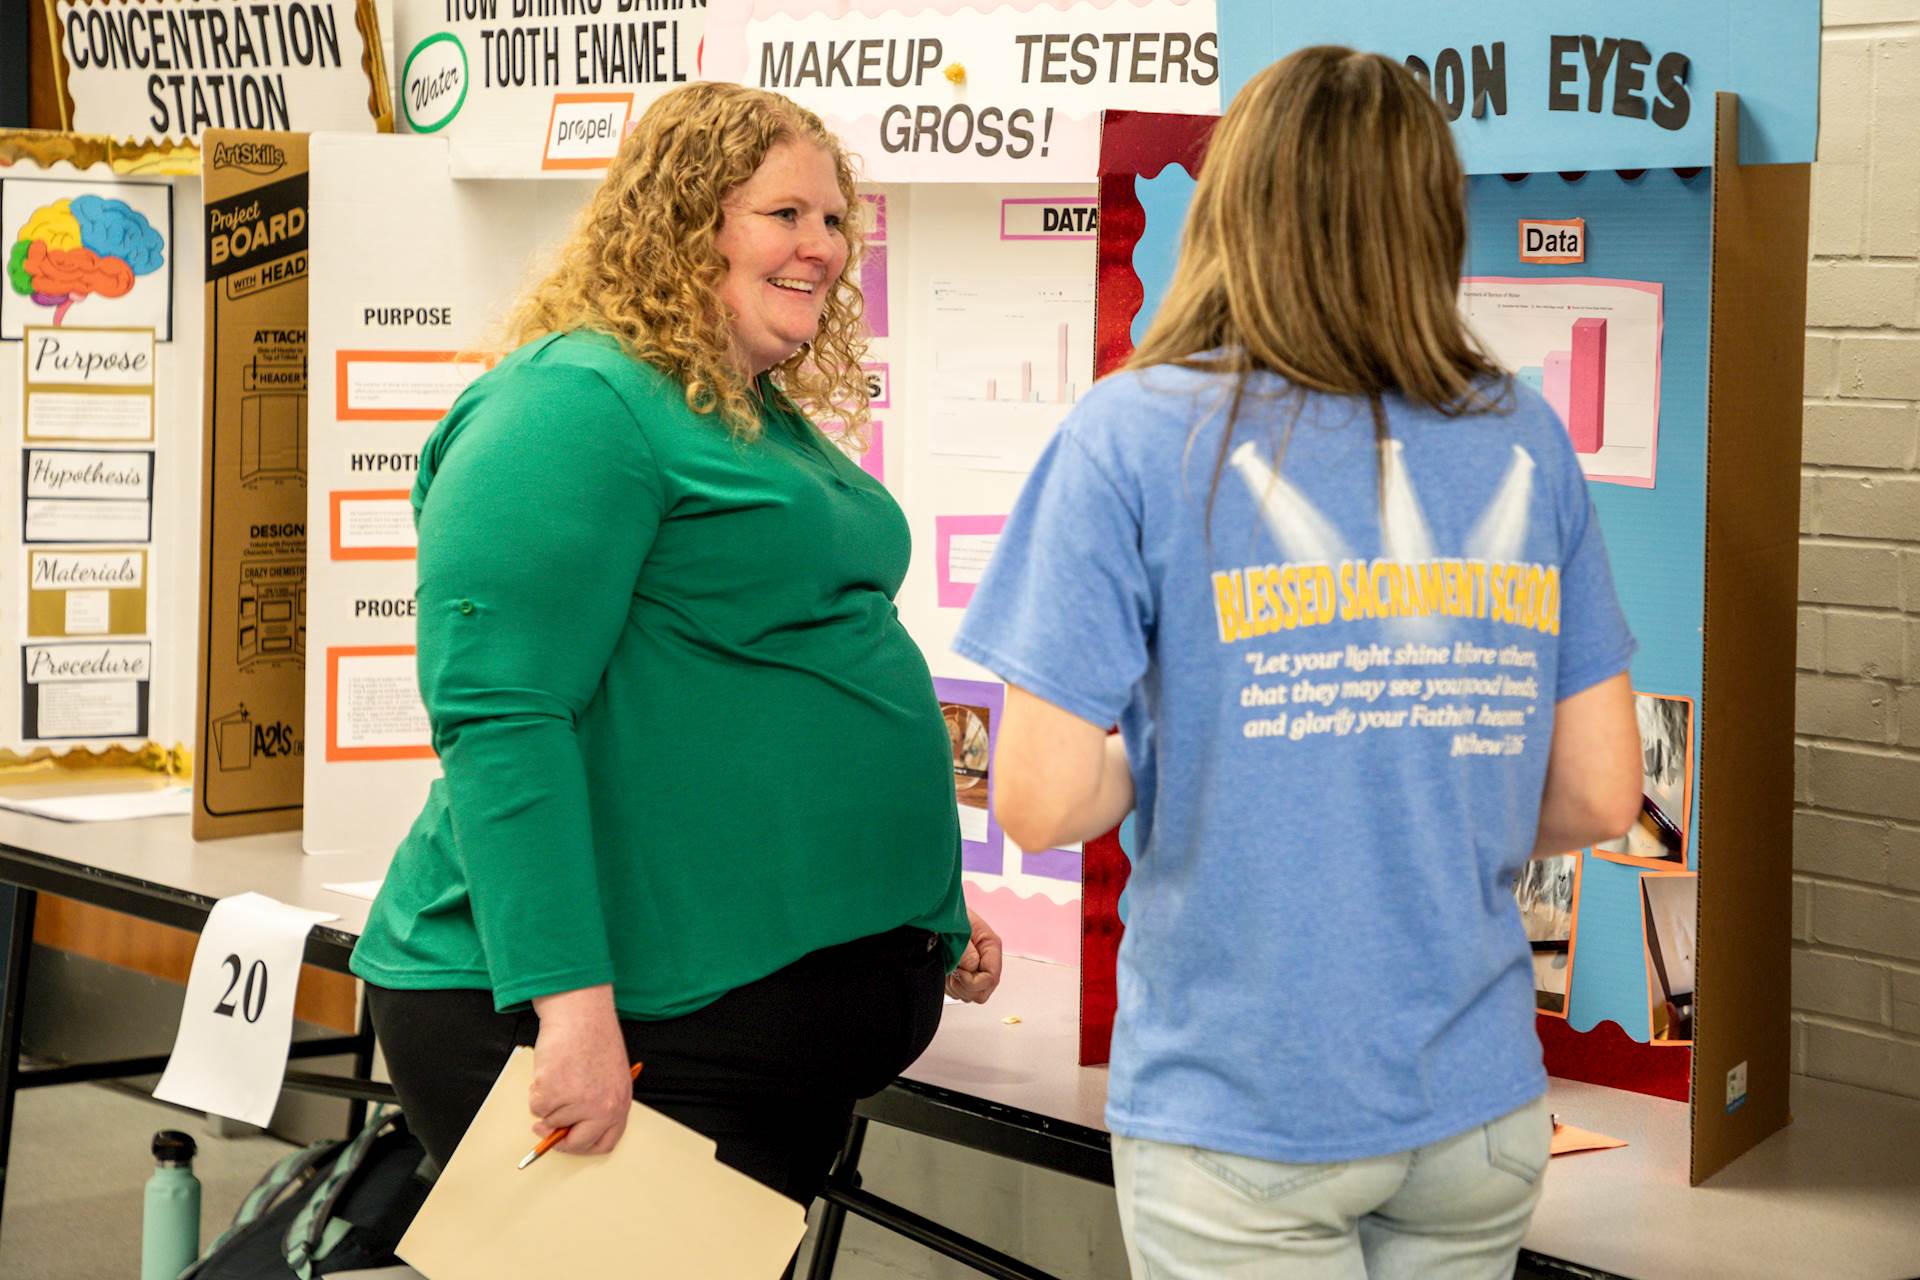 Woman in green shirt and black pants talks to student in jeans and blue T-shirt in front of science fair display